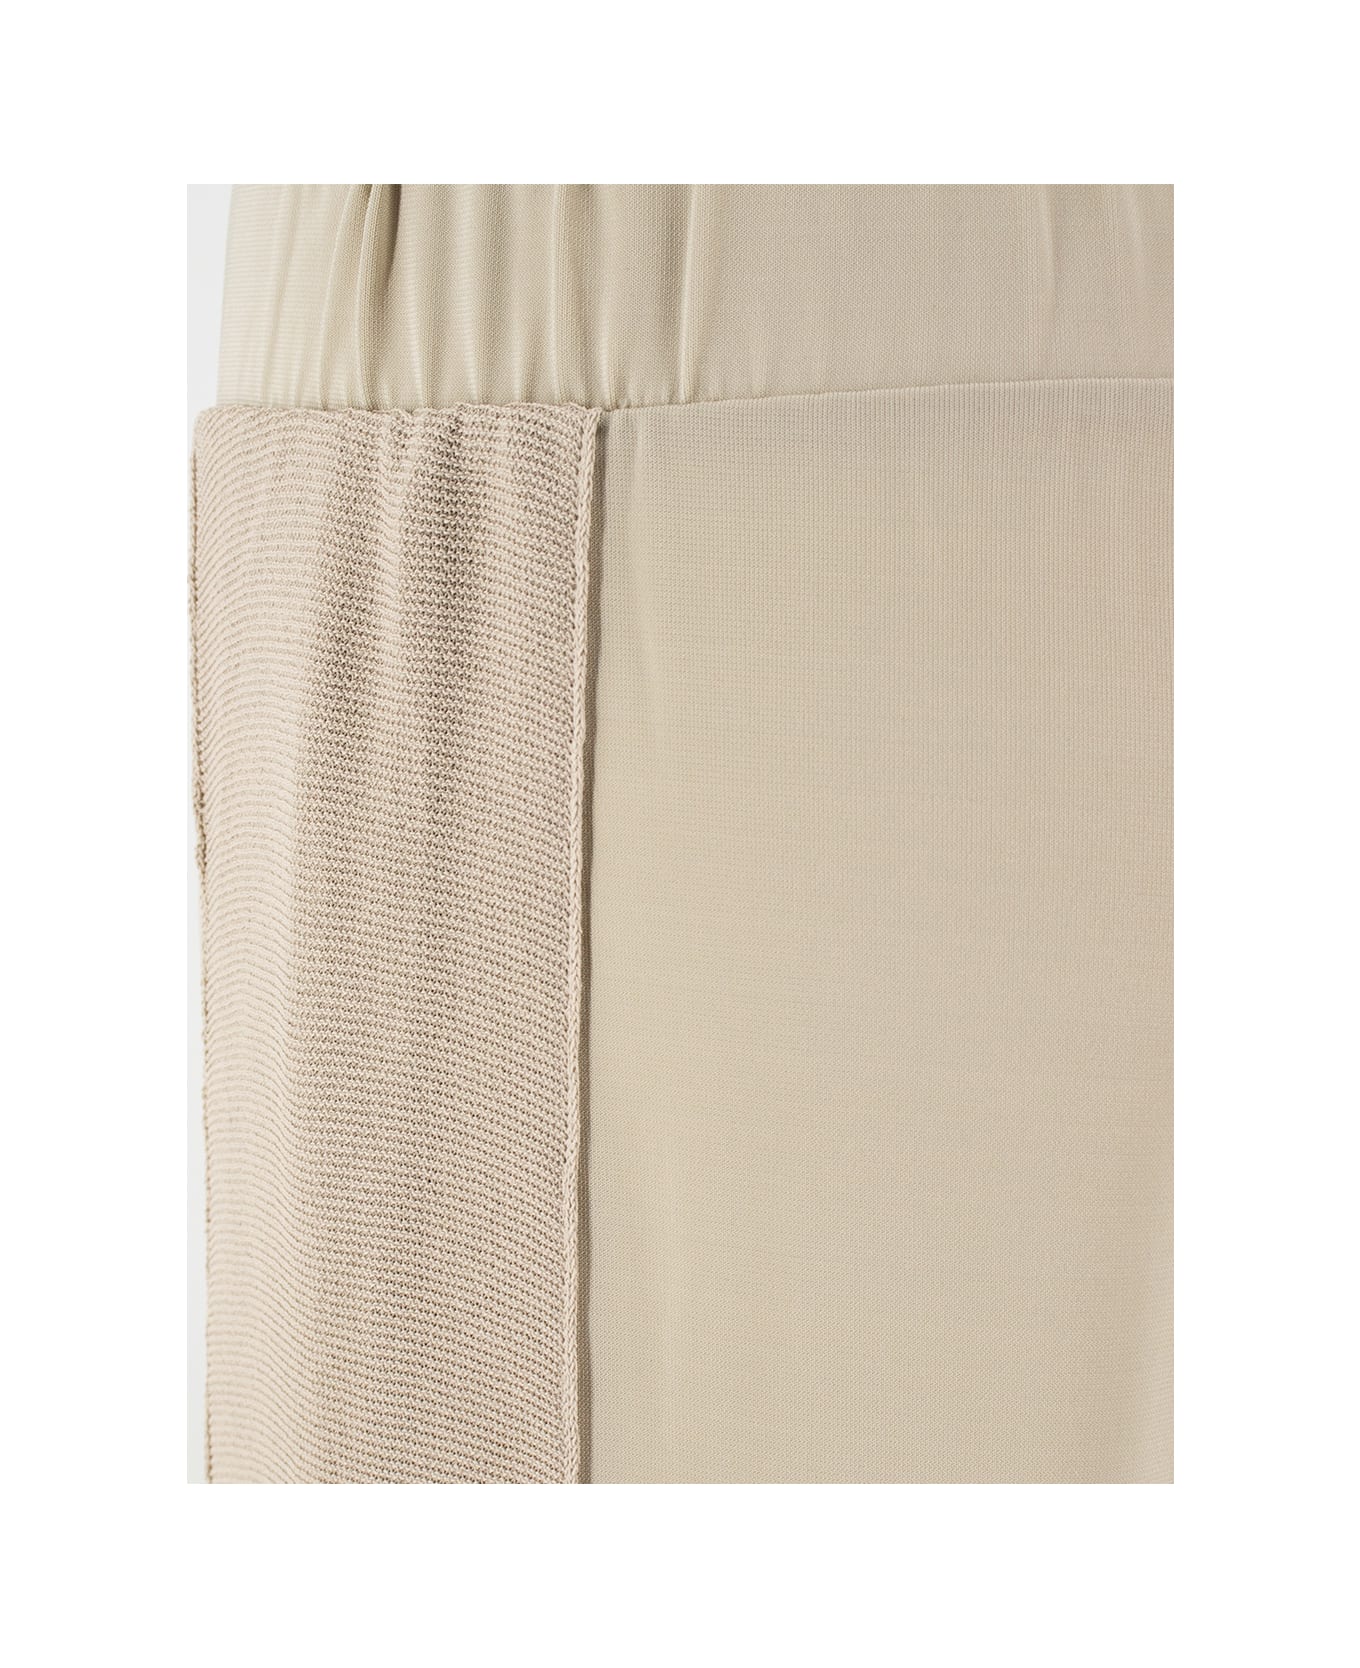 Le Tricot Perugia Trousers - BEIGE ボトムス